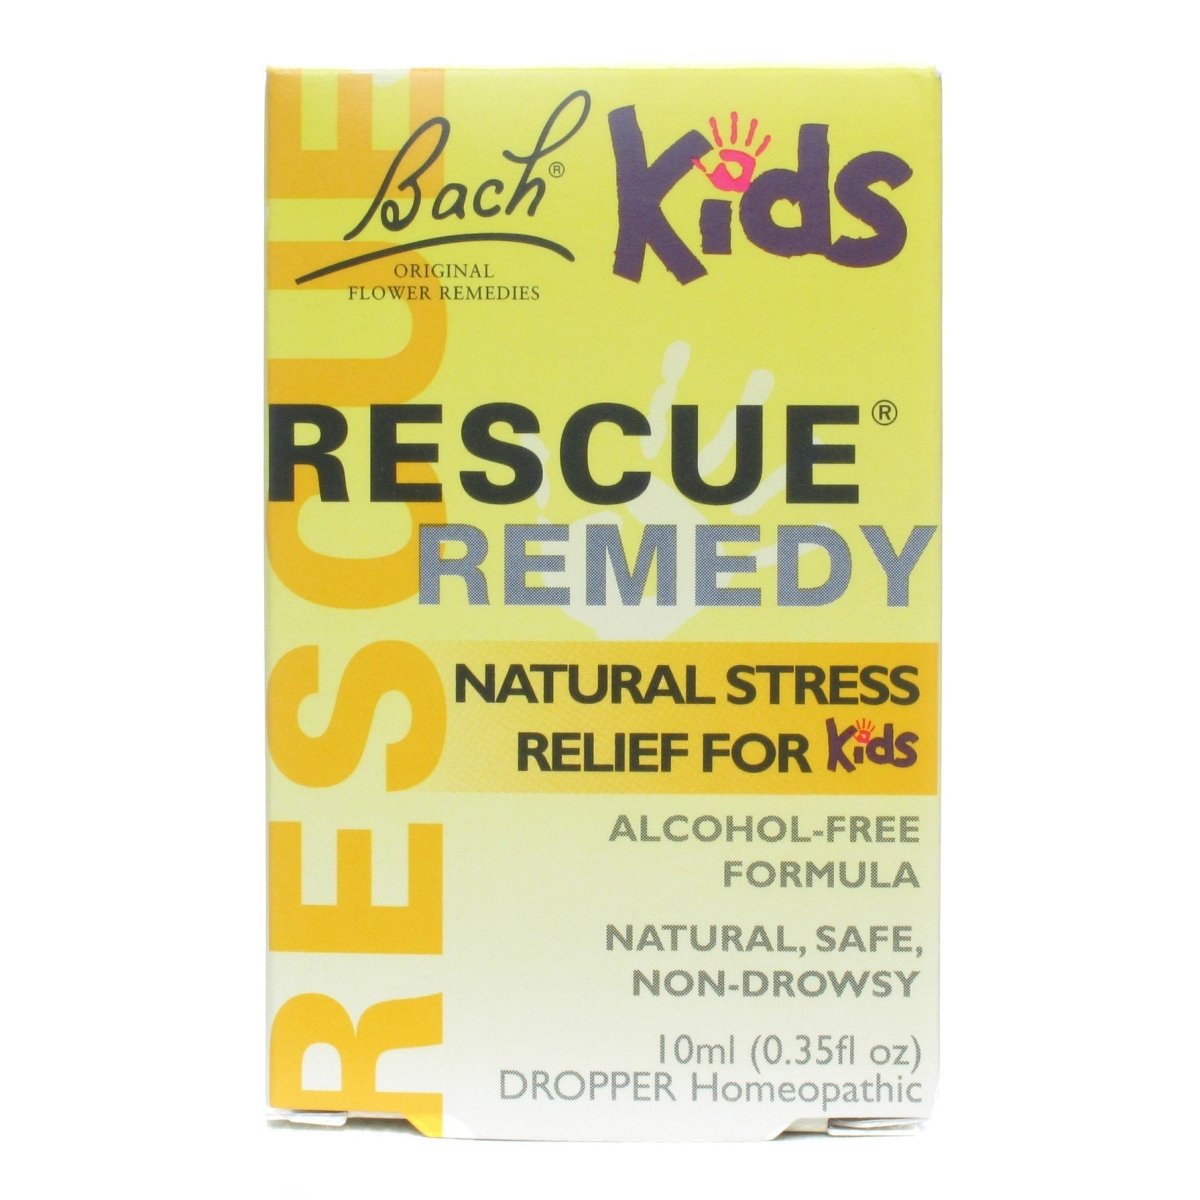 Rescue Remedy - Natural Stress Relief for Kids - Homeopathic - 10ml